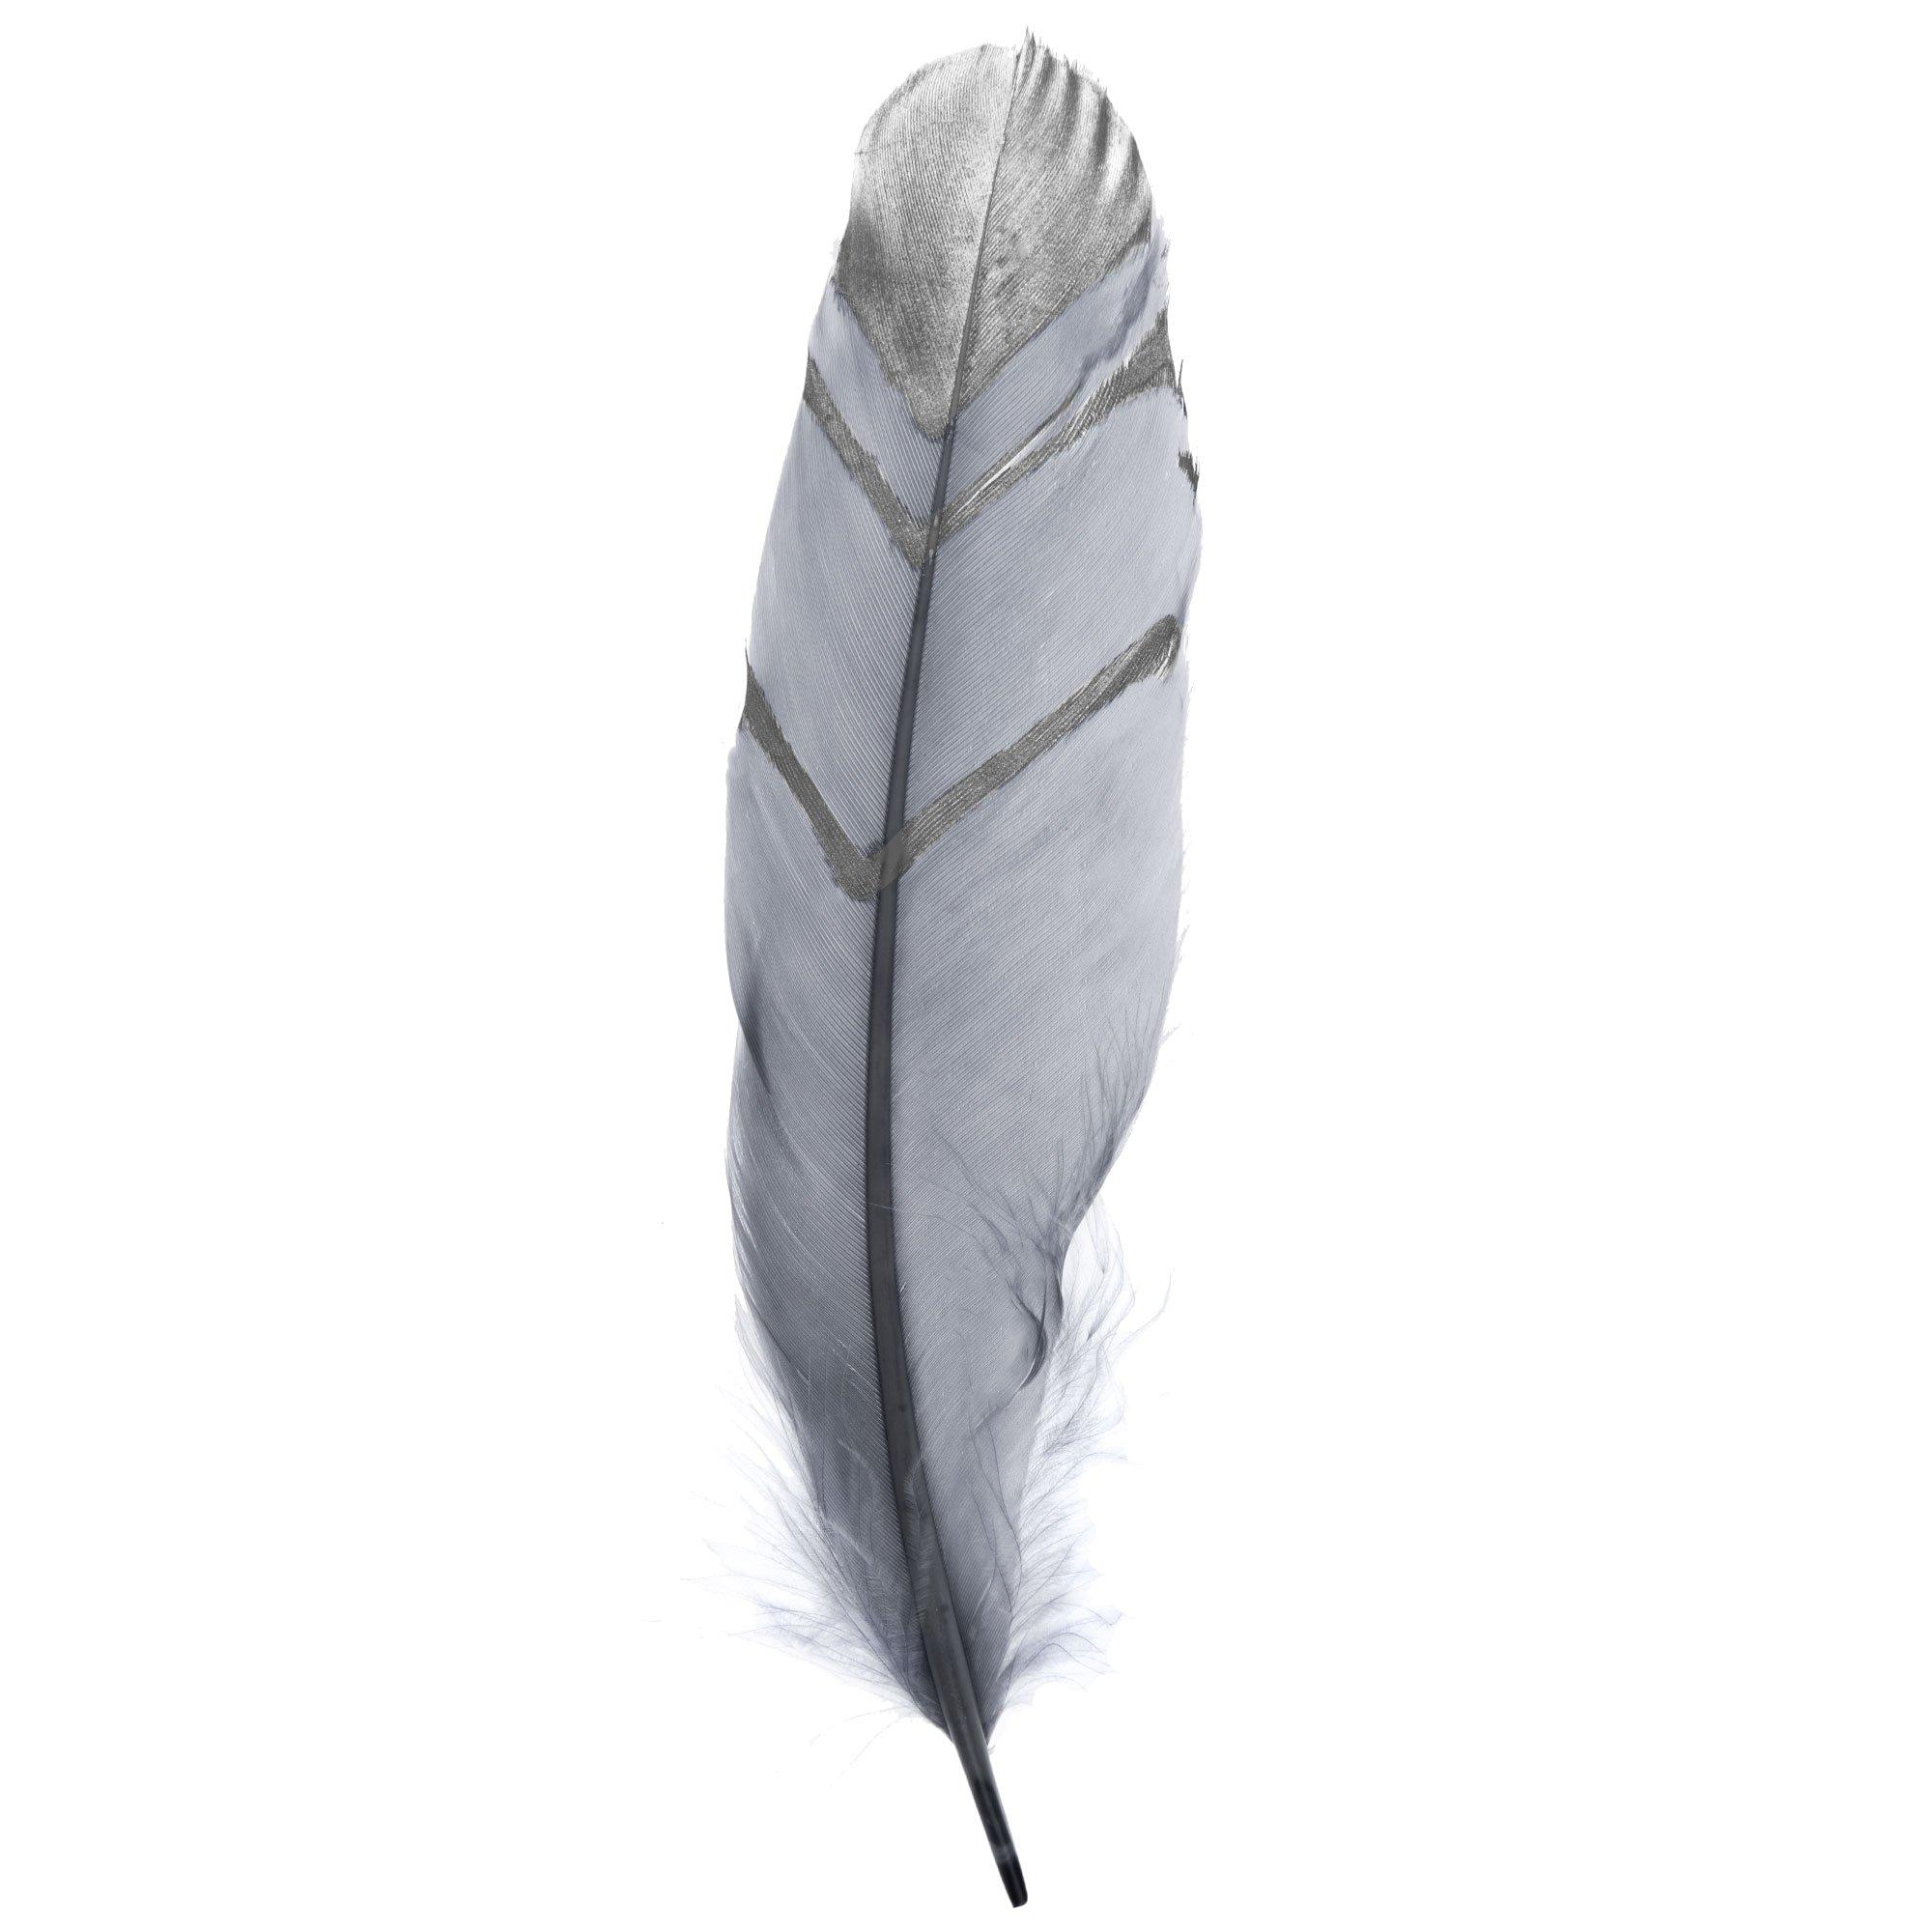 Different Angles of the Goose Feathers Collection Stock Image - Image of  gray, poultry: 31816413